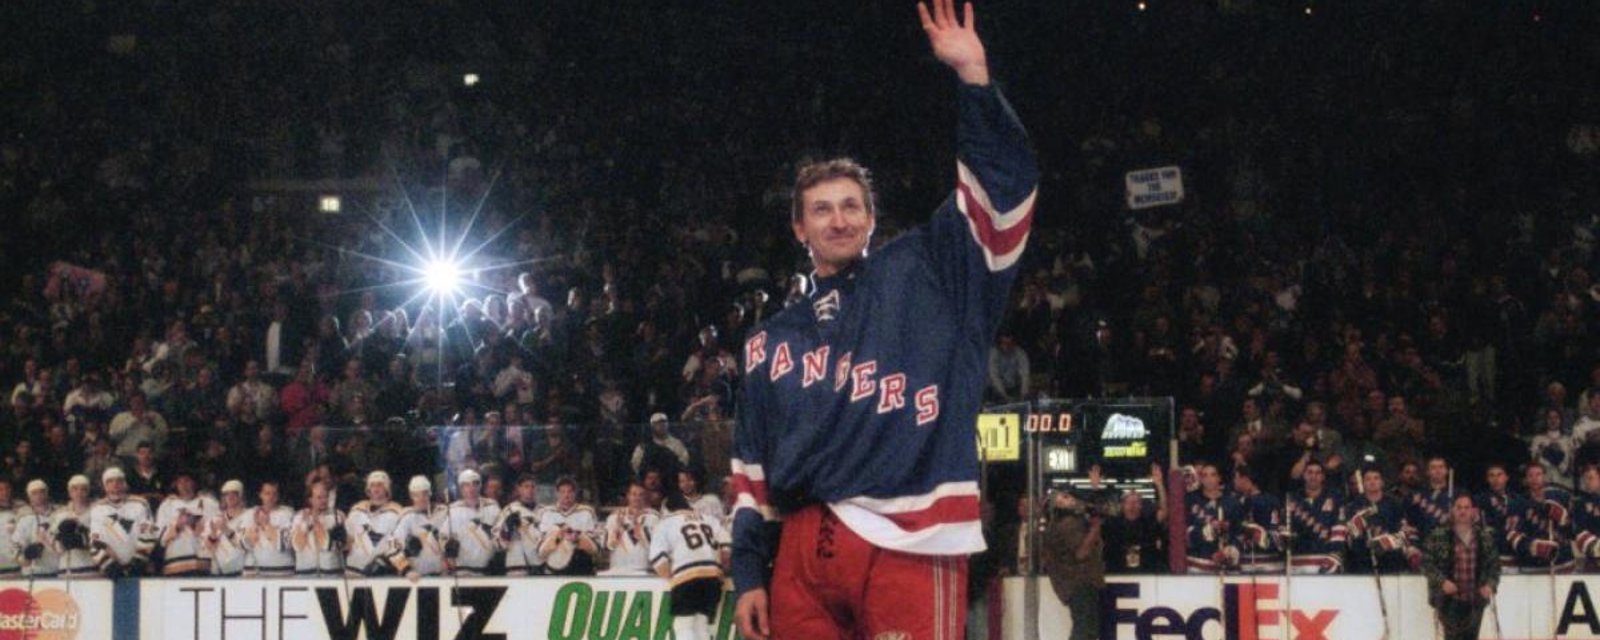 Wayne Gretzky’s last game-worn jersey sold for record price!